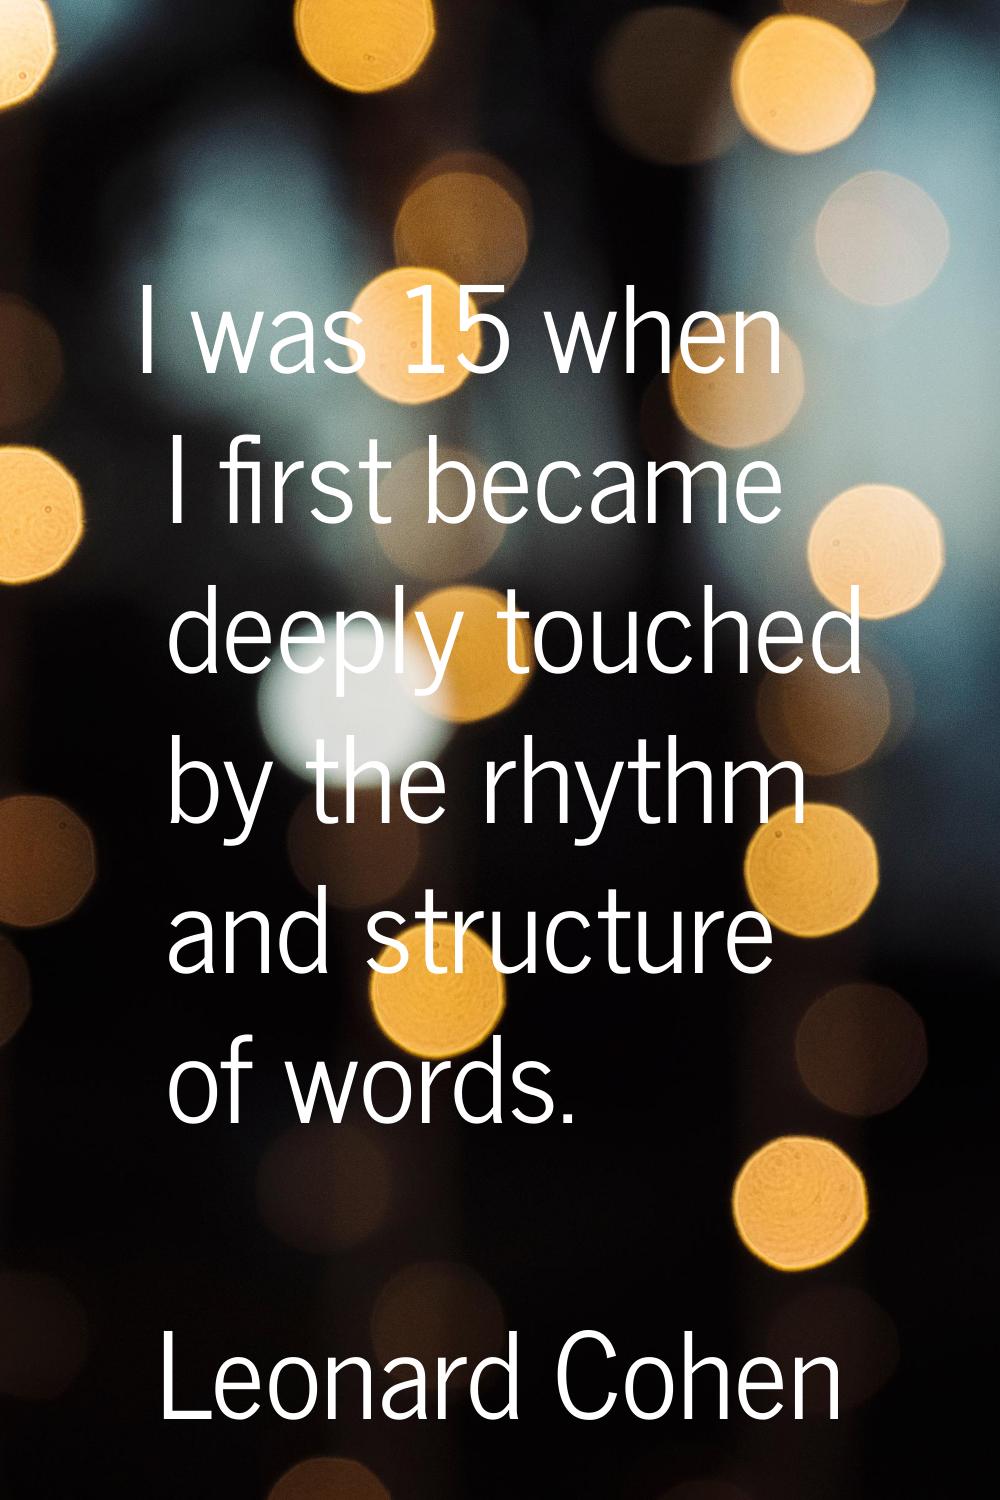 I was 15 when I first became deeply touched by the rhythm and structure of words.